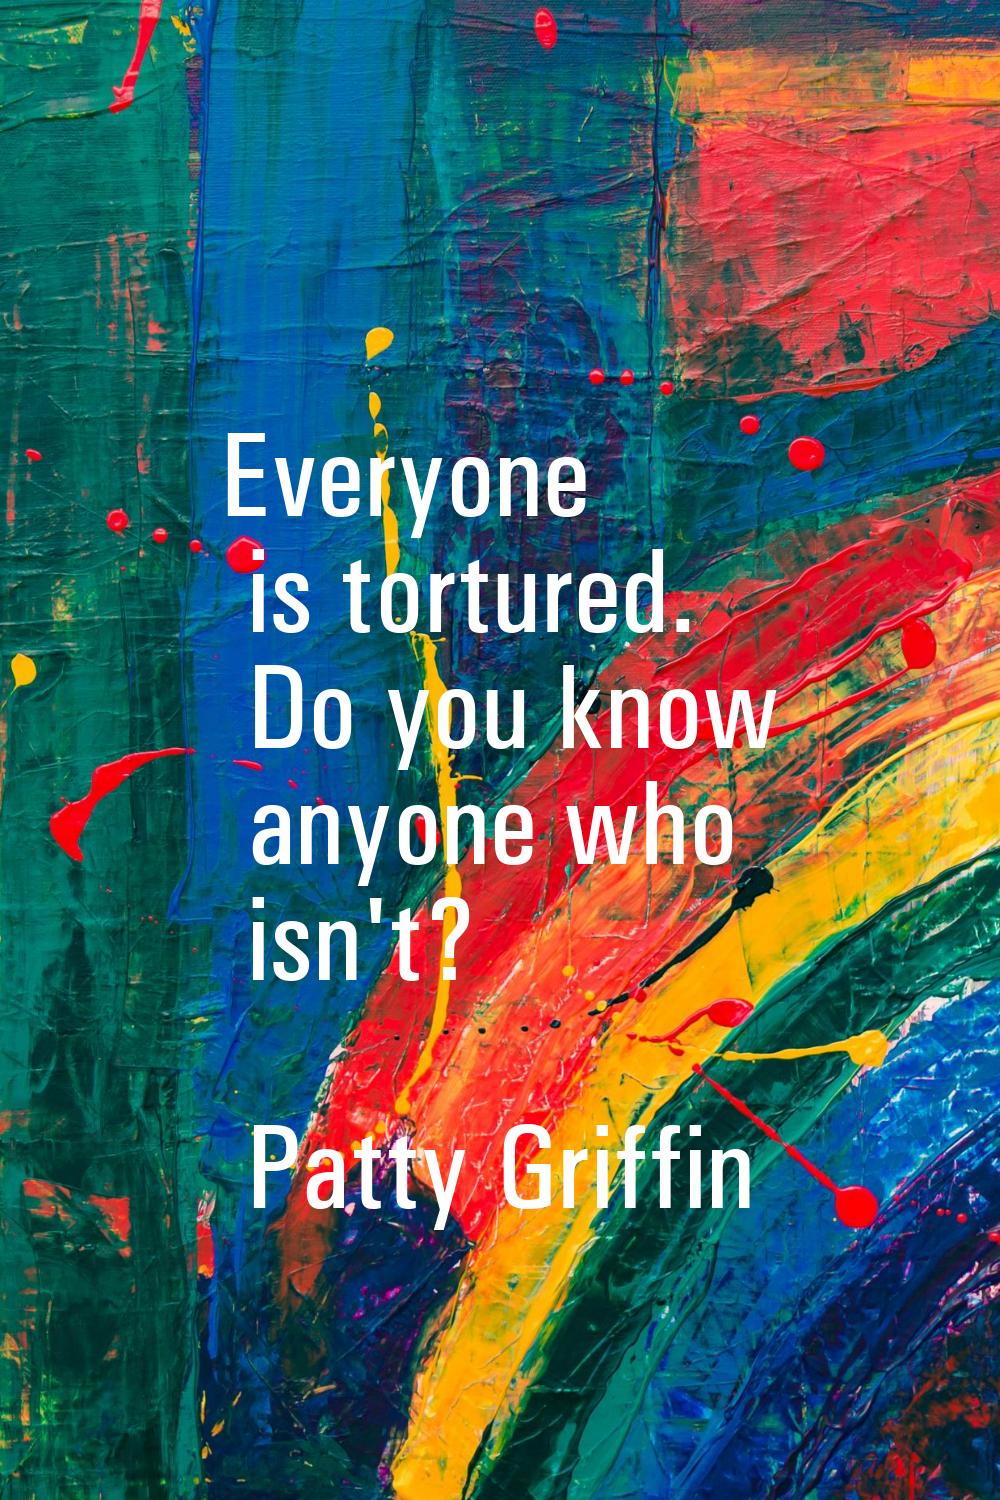 Everyone is tortured. Do you know anyone who isn't?